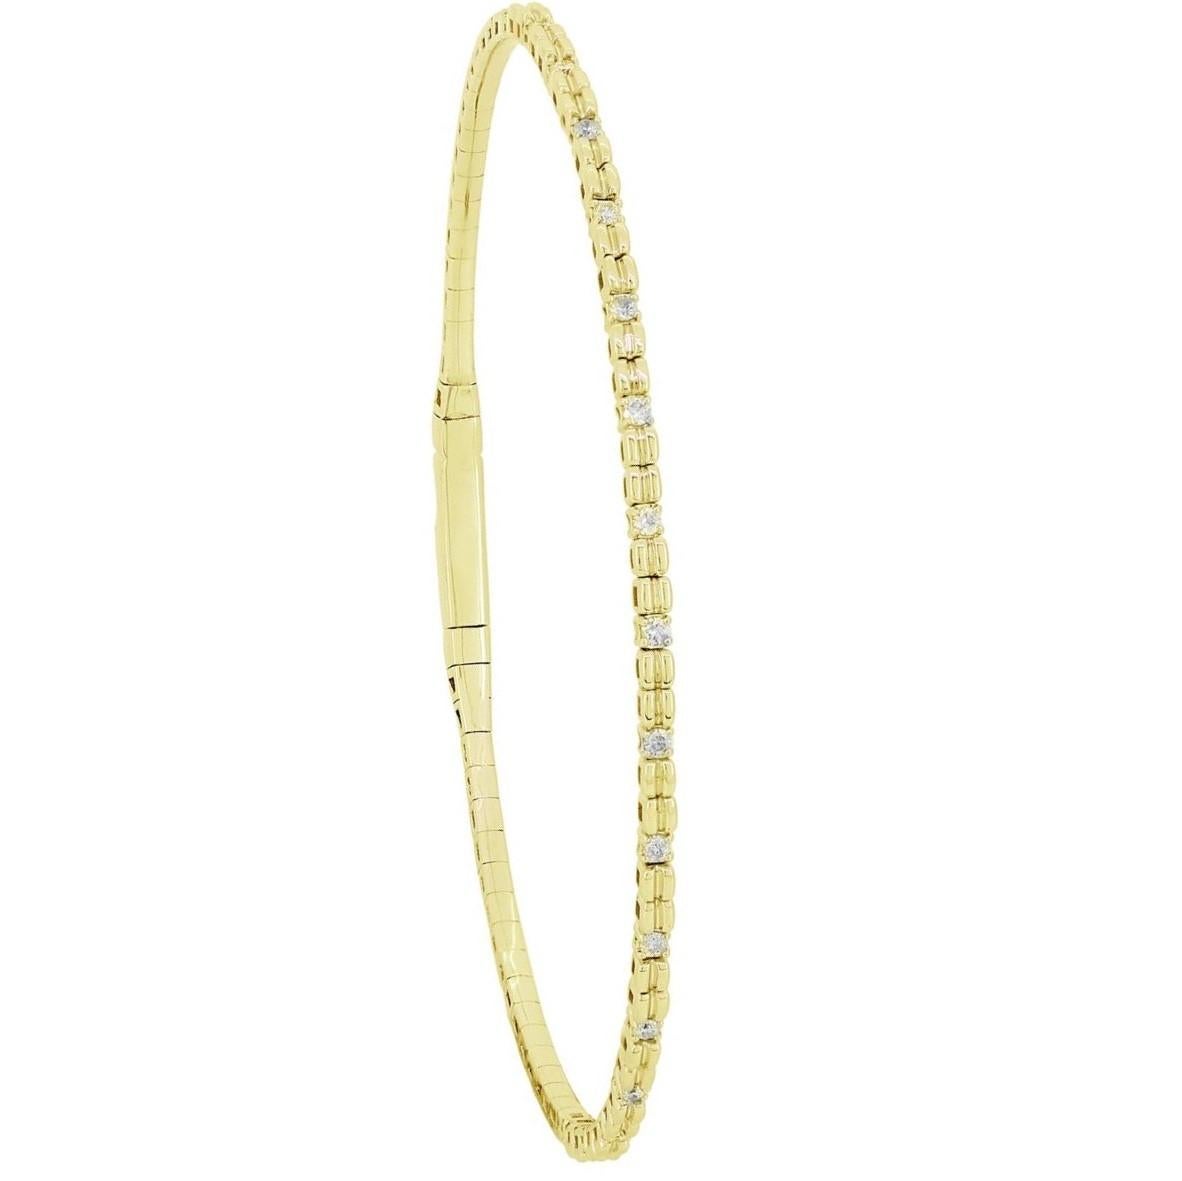 This Luxle 14K Yellow Gold bangle bracelet wraps elegantly around your wrist and is a showstopper! With its sleek form and 0.24 carats of round full-cut diamonds, this bangle has a basic and contemporary style.

Please follow the Luxury Jewels